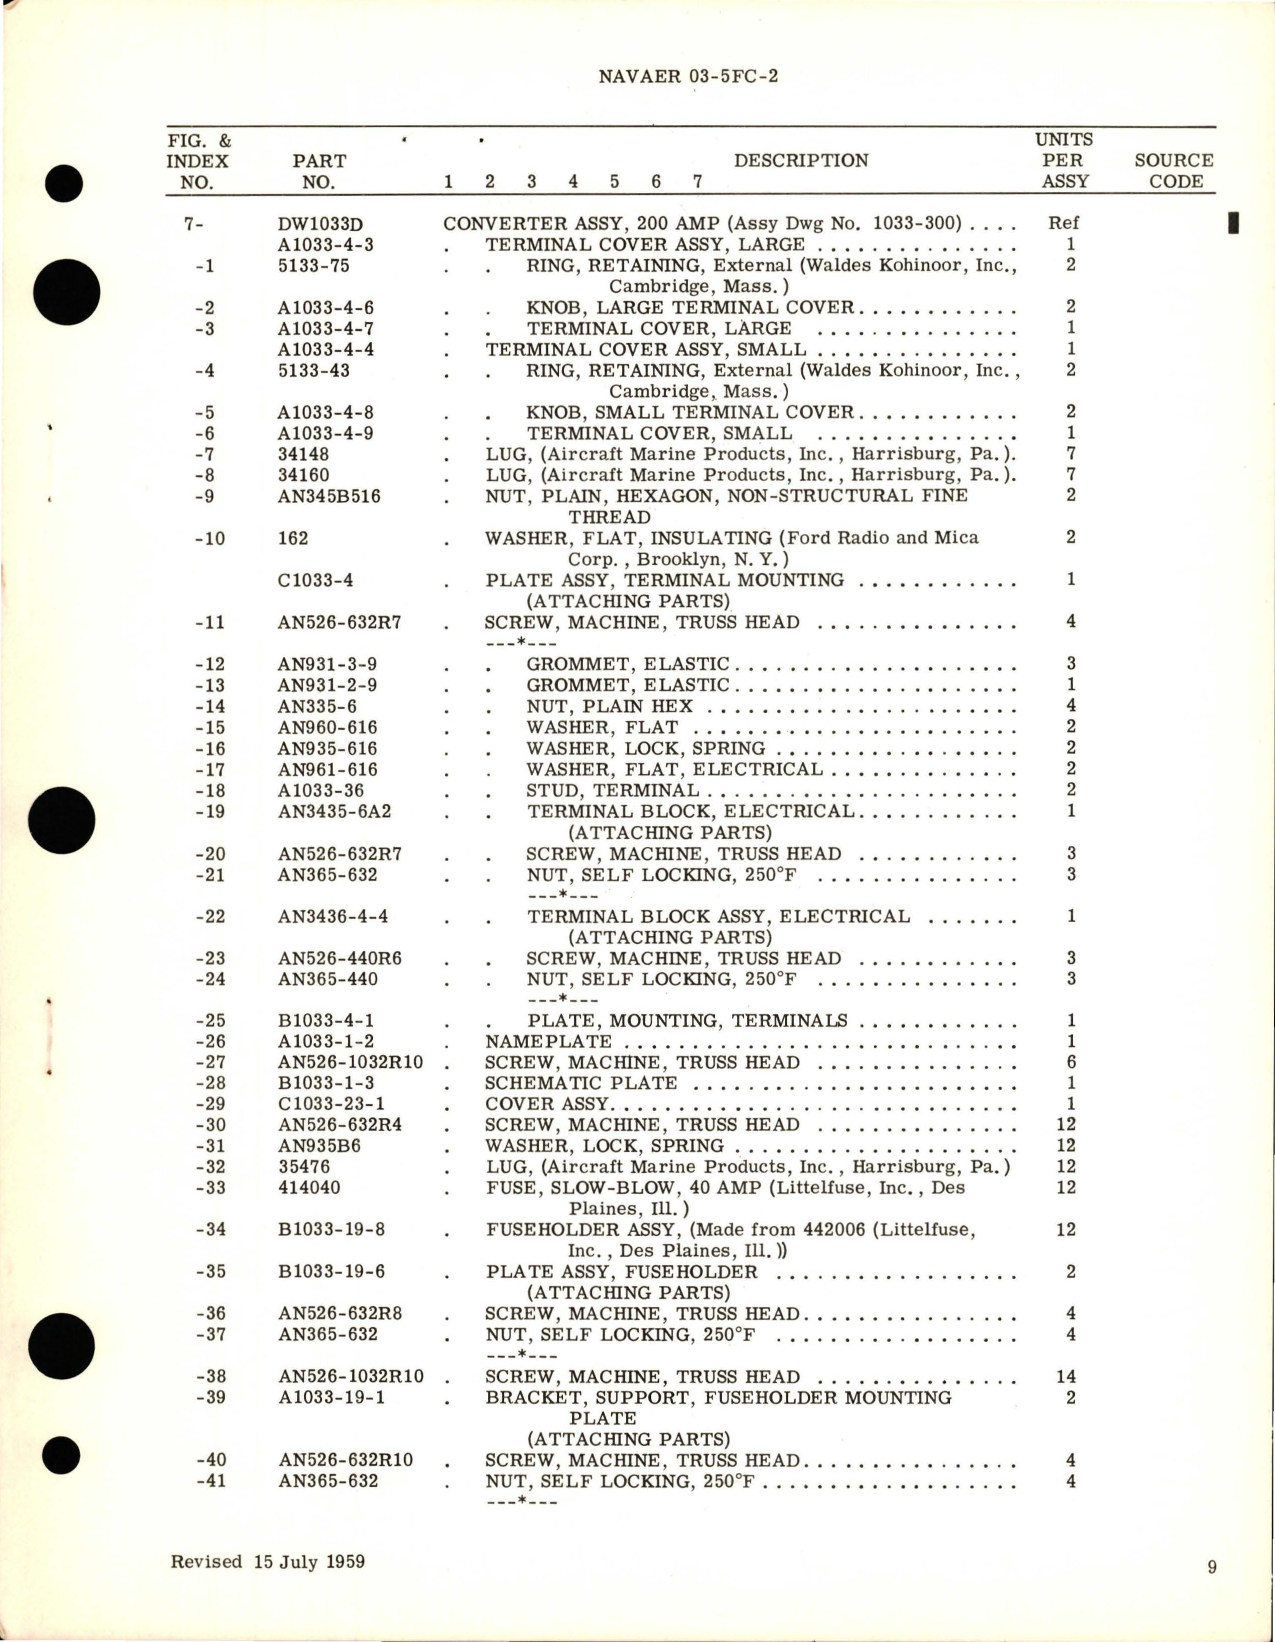 Sample page 5 from AirCorps Library document: Overhaul Instructions with Parts Breakdown for 200 Amp Converter - Part DW1033D